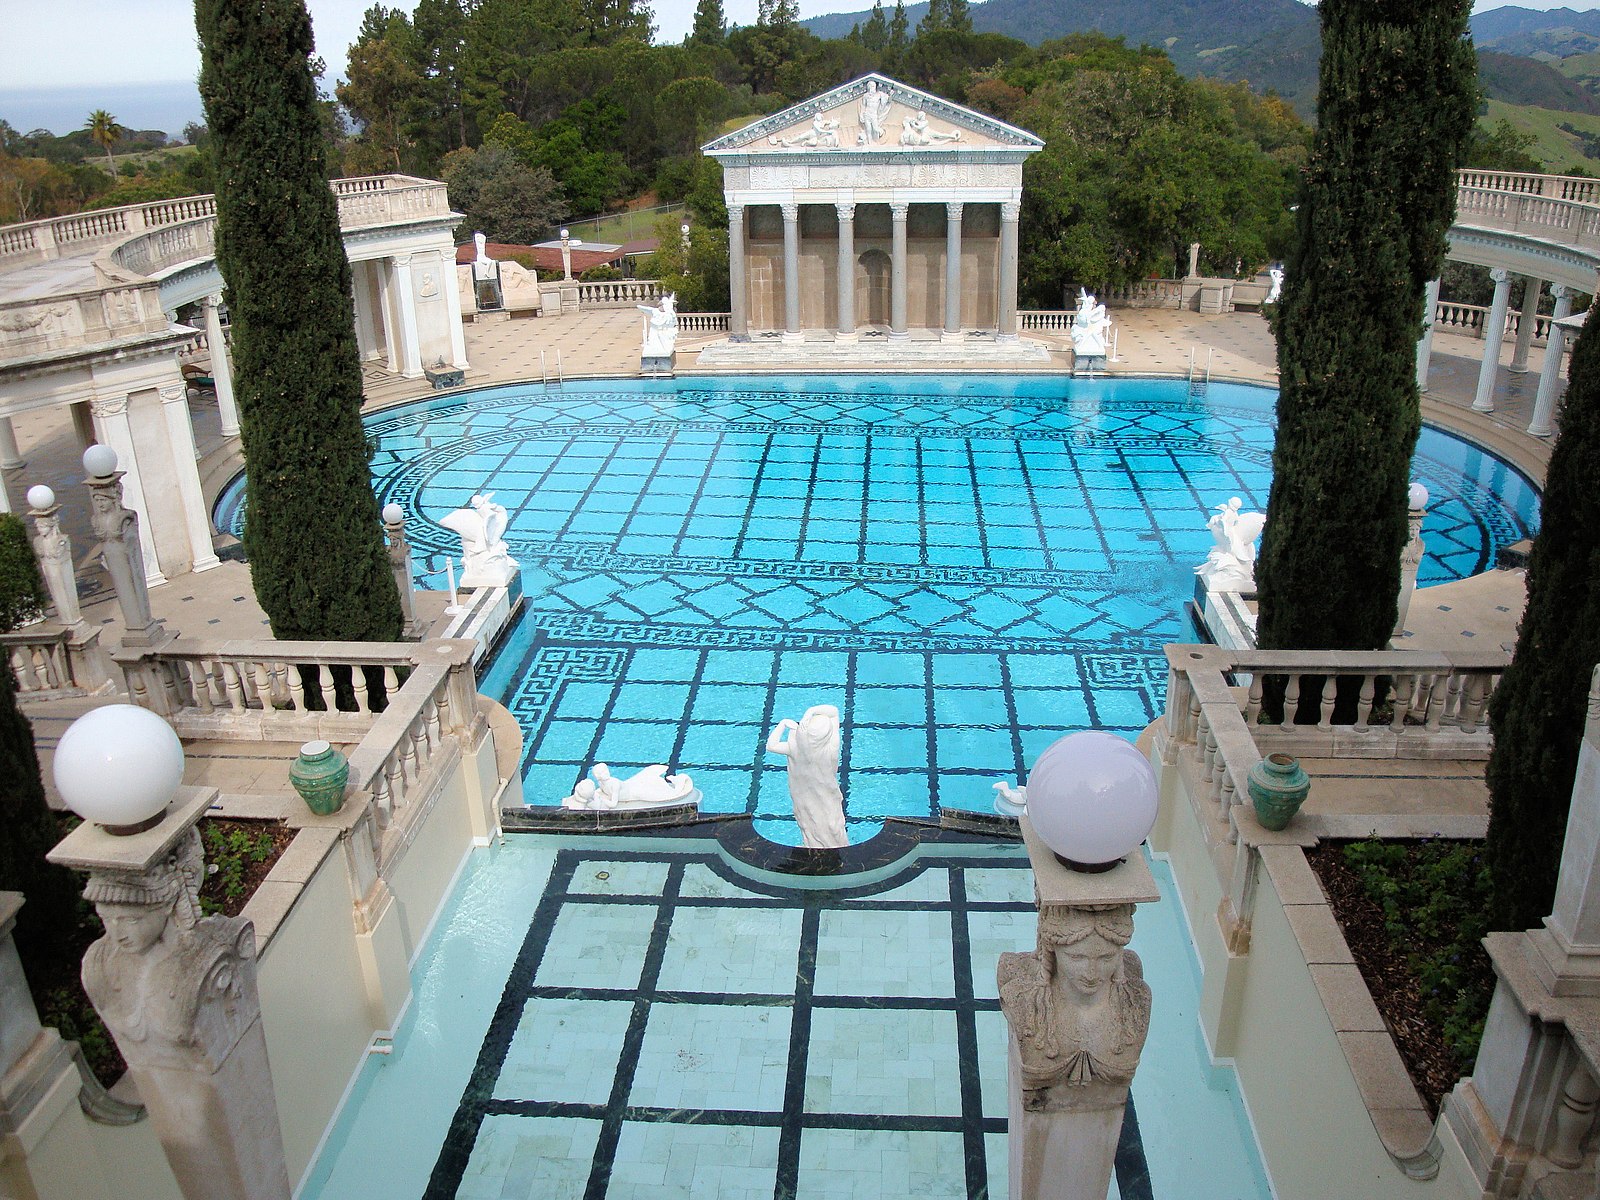 Outside pool with a grid of black lines on the bottom and ornate Roman sculptures